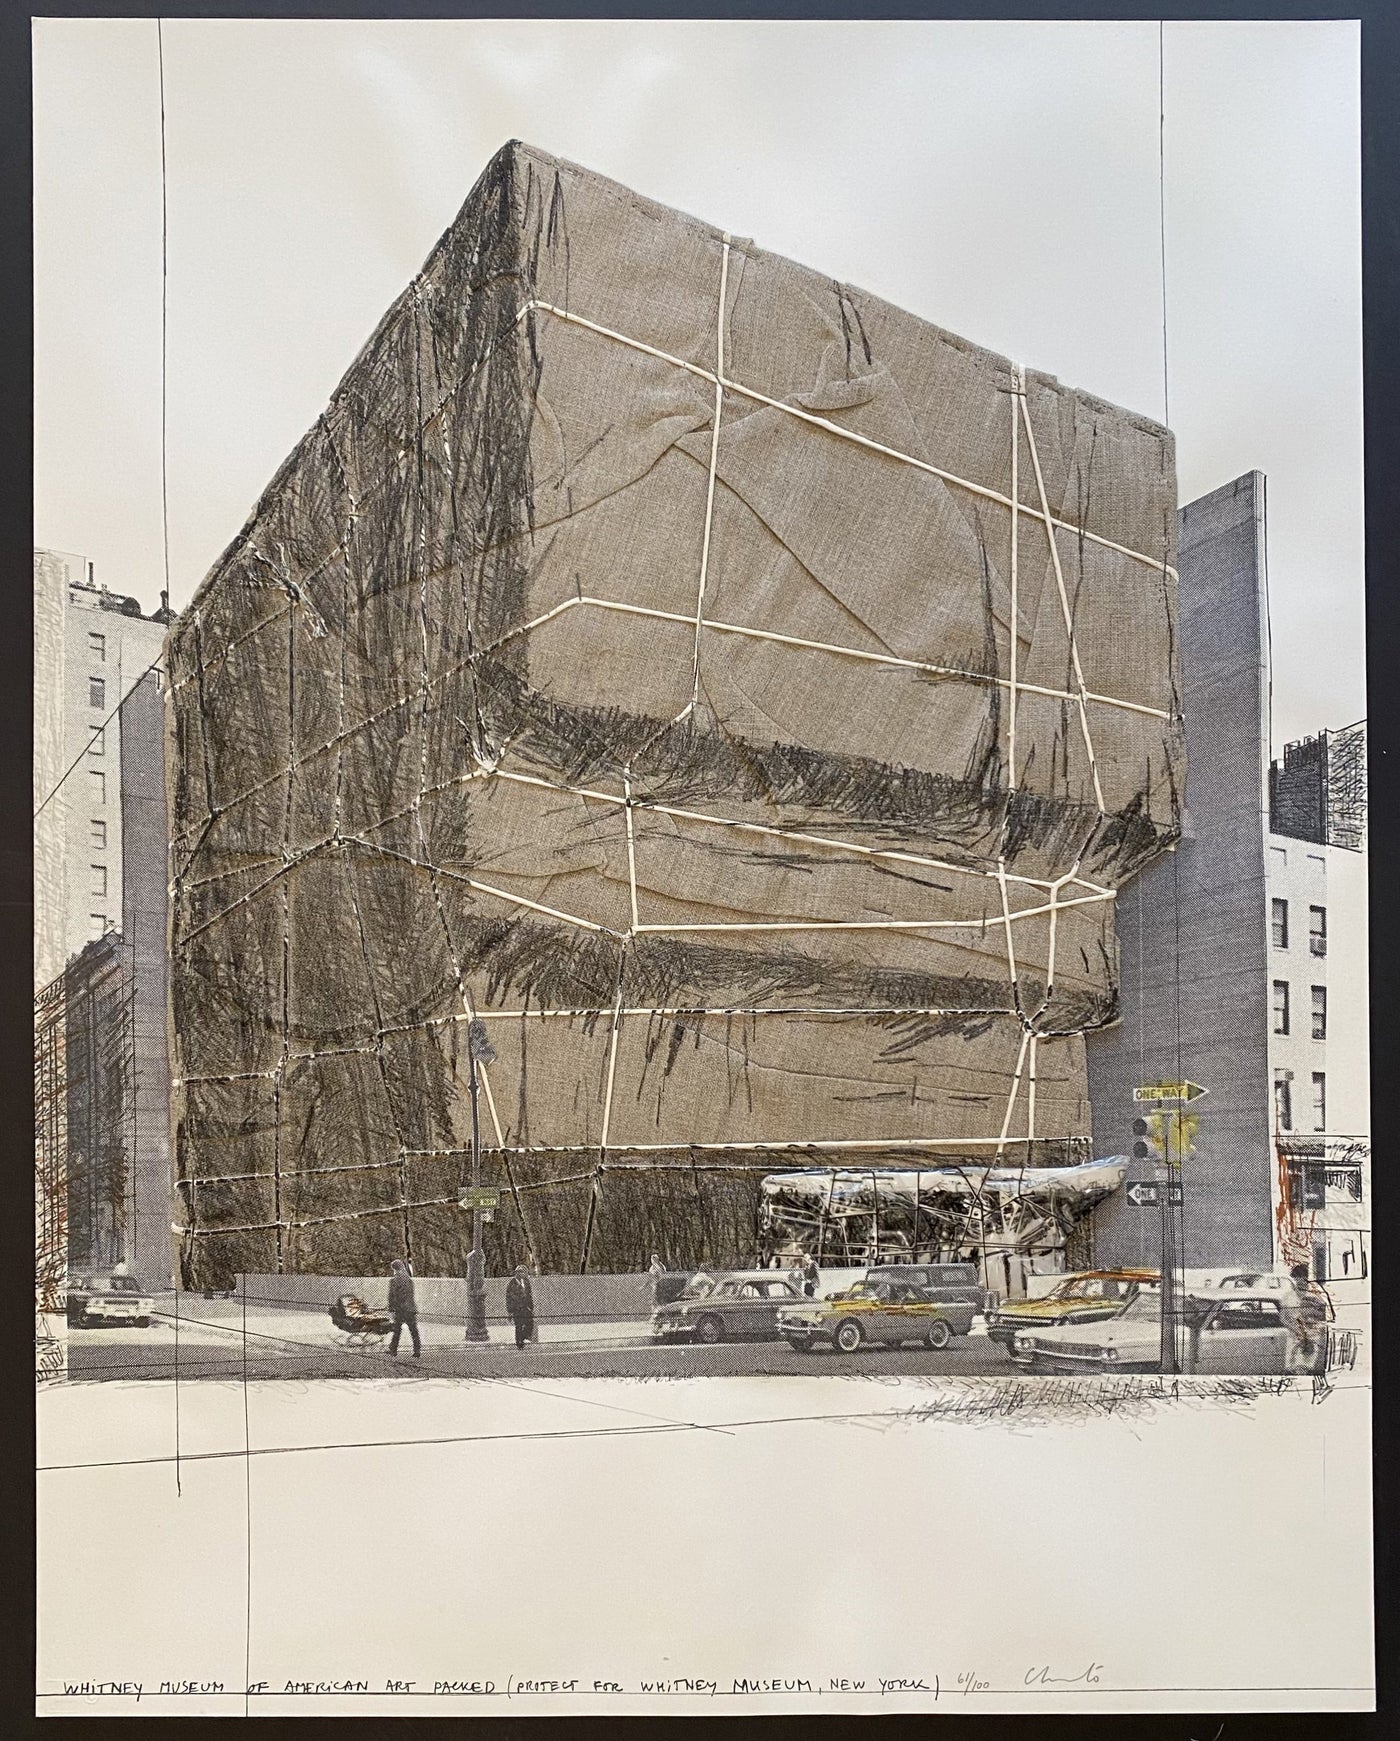 Christo Whitney Museum of American Art, Packed, Project for New York (Schellman and Benecke 35) 1971